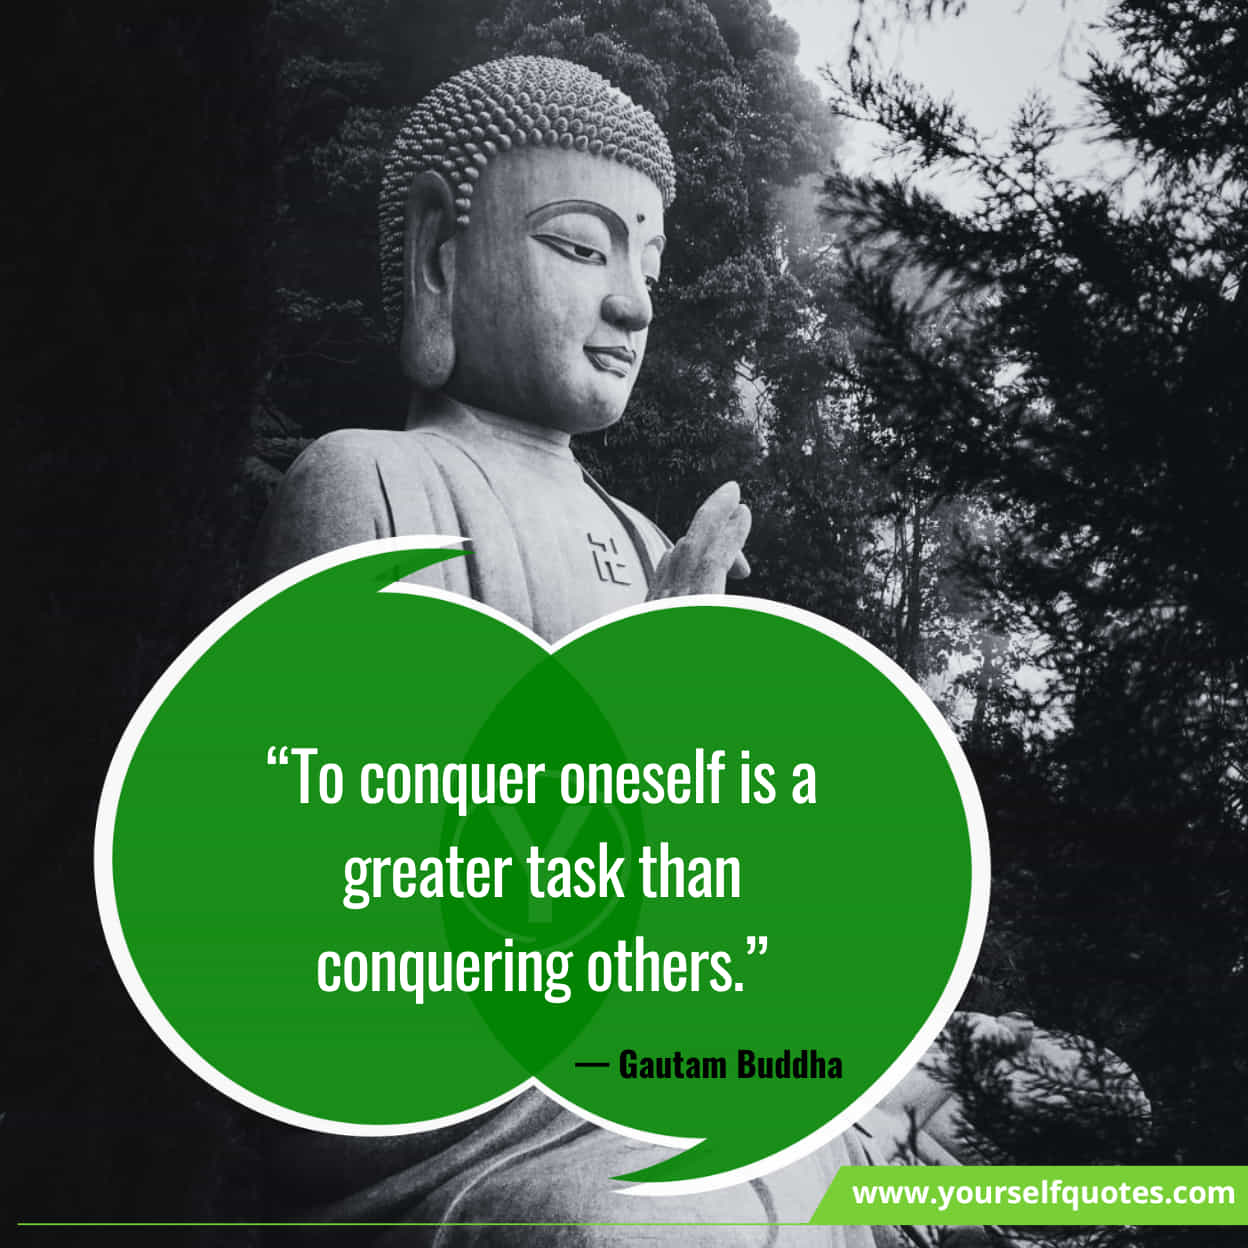 Buddha Quotes Image Wallpapers